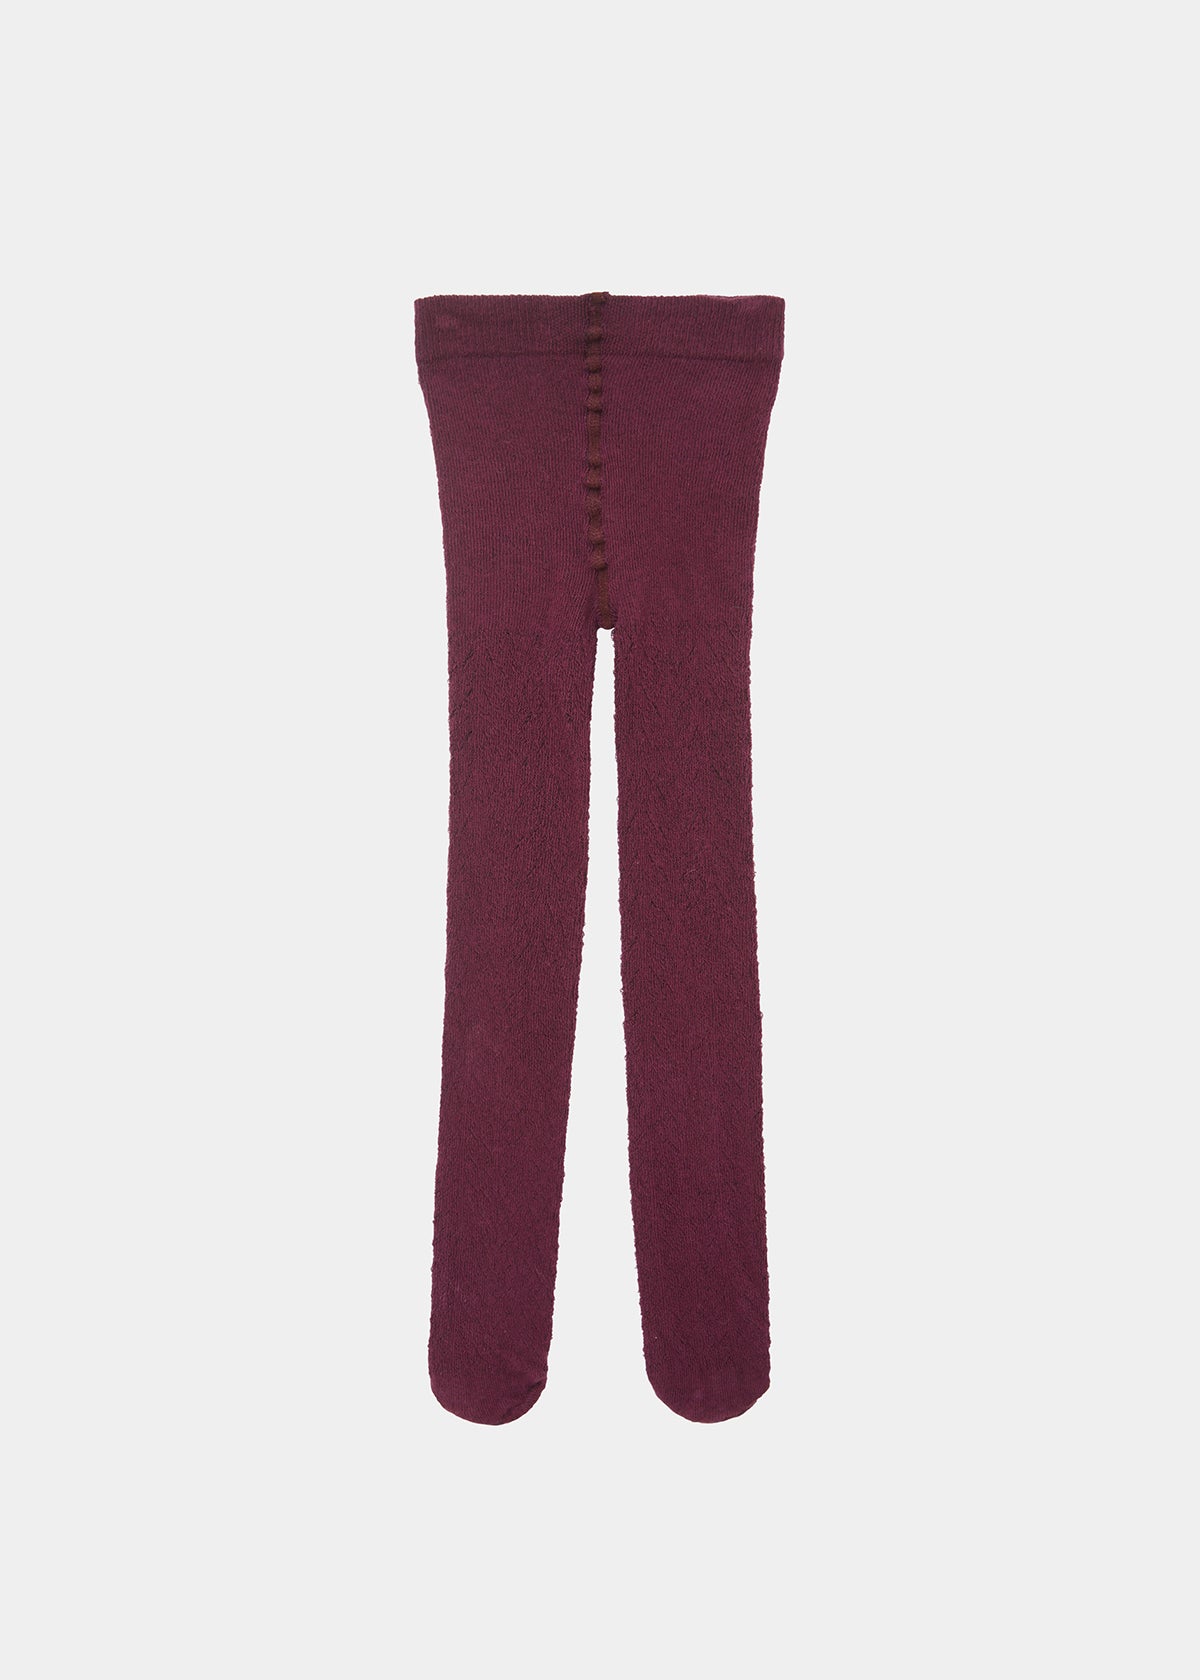 BABY POINTELLE TIGHTS - PLUM (BACK)